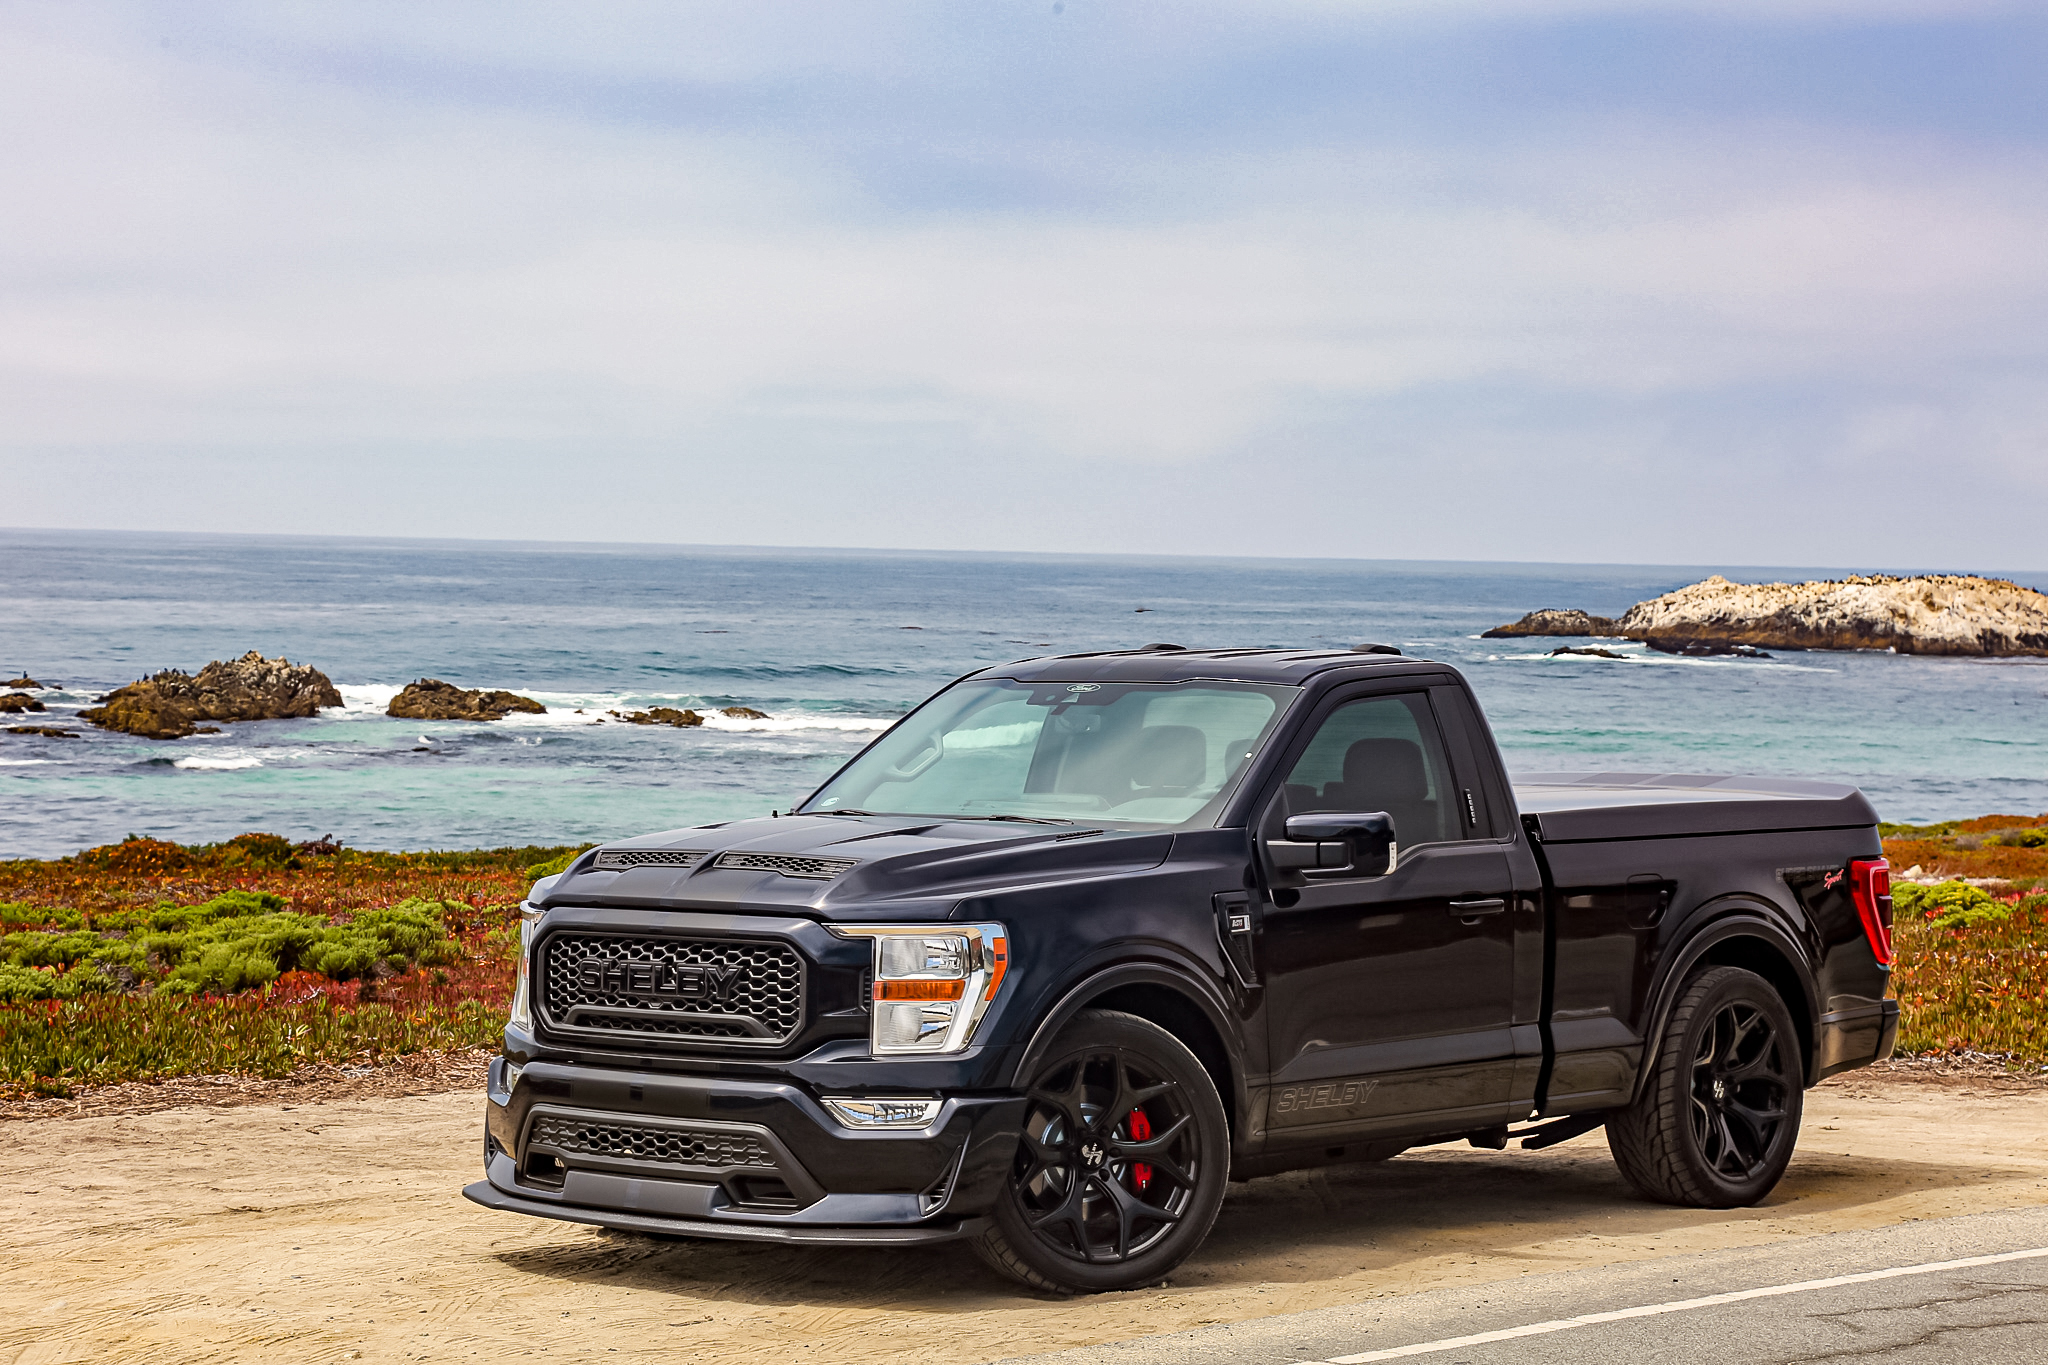 Shelby F150 Super Snake is the street performance truck Ford doesn't